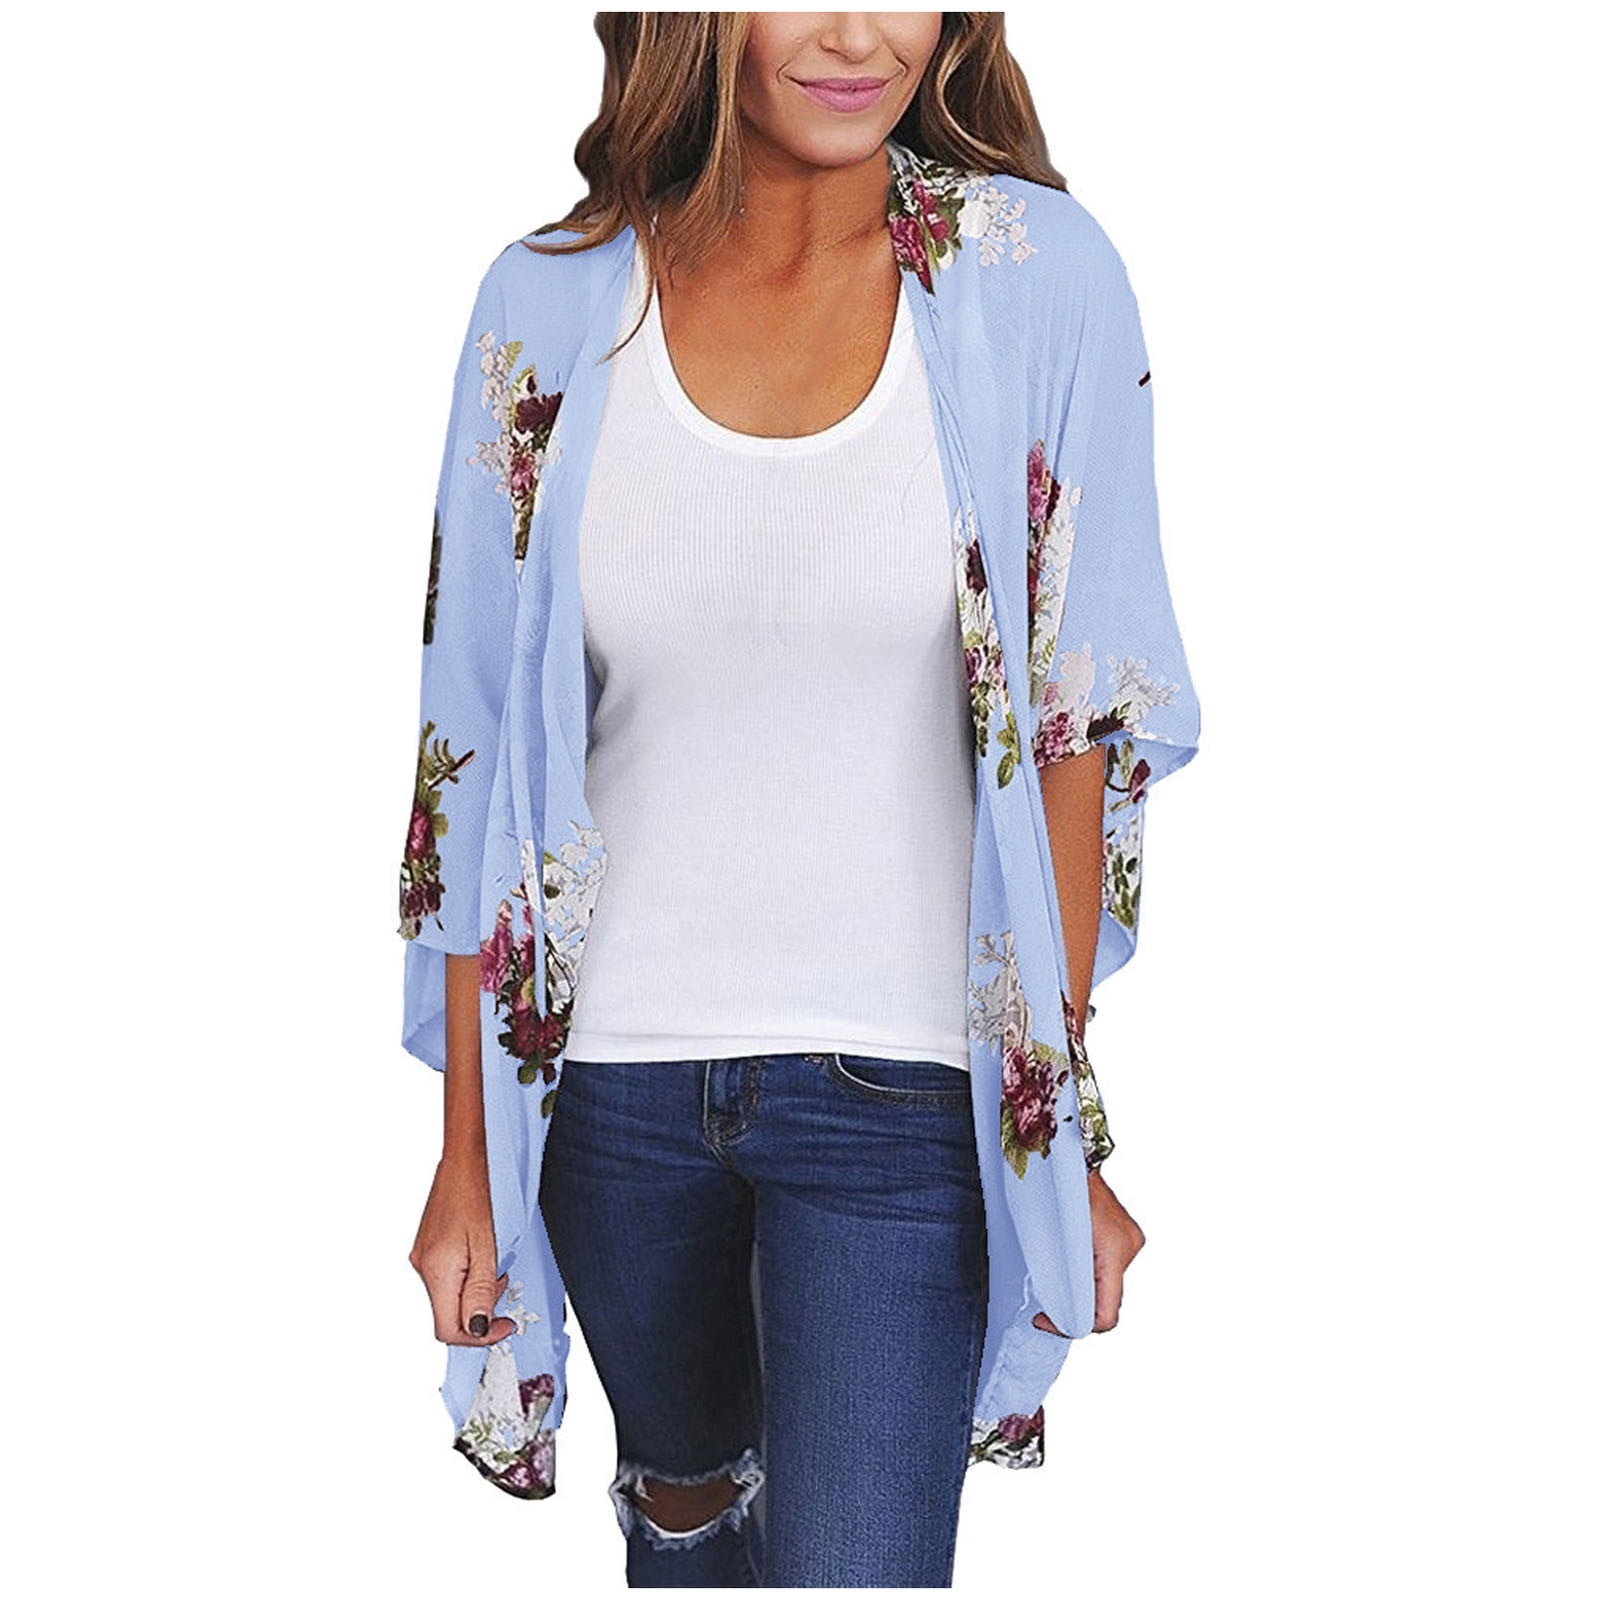 Short Sleeve Shirts for Women Dressy Casual Floral Print Shawl Cardigan  Fall Open Front Cover Up Chiffon Blouses Tops - Walmart.com